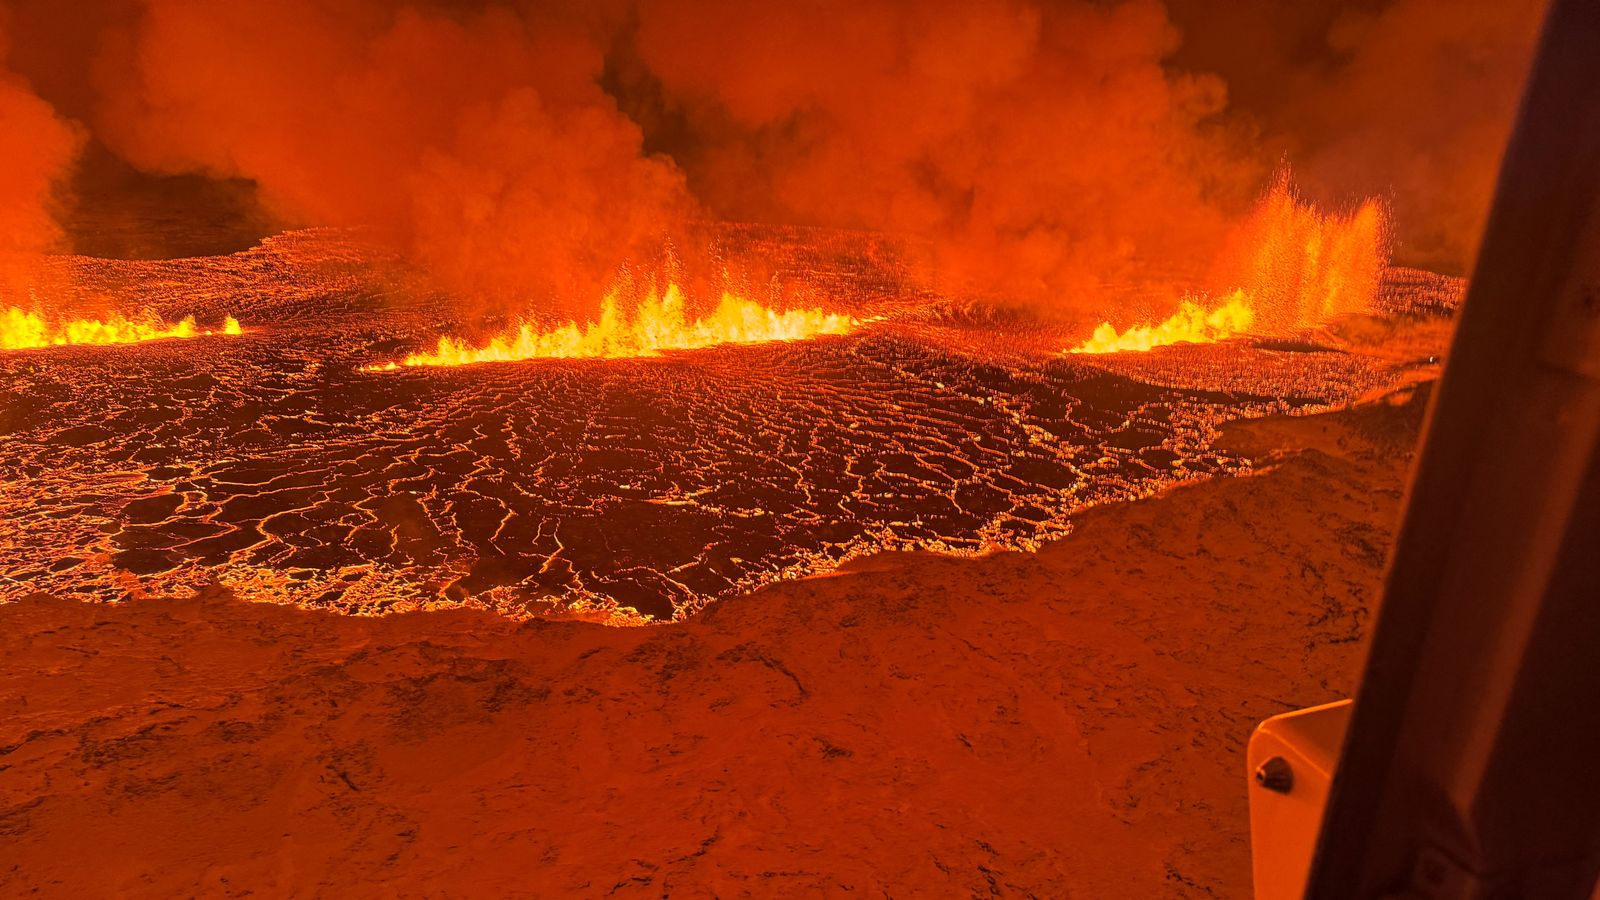 Iceland volcano: The best images and video from spectacular eruption on Reykjanes peninsula